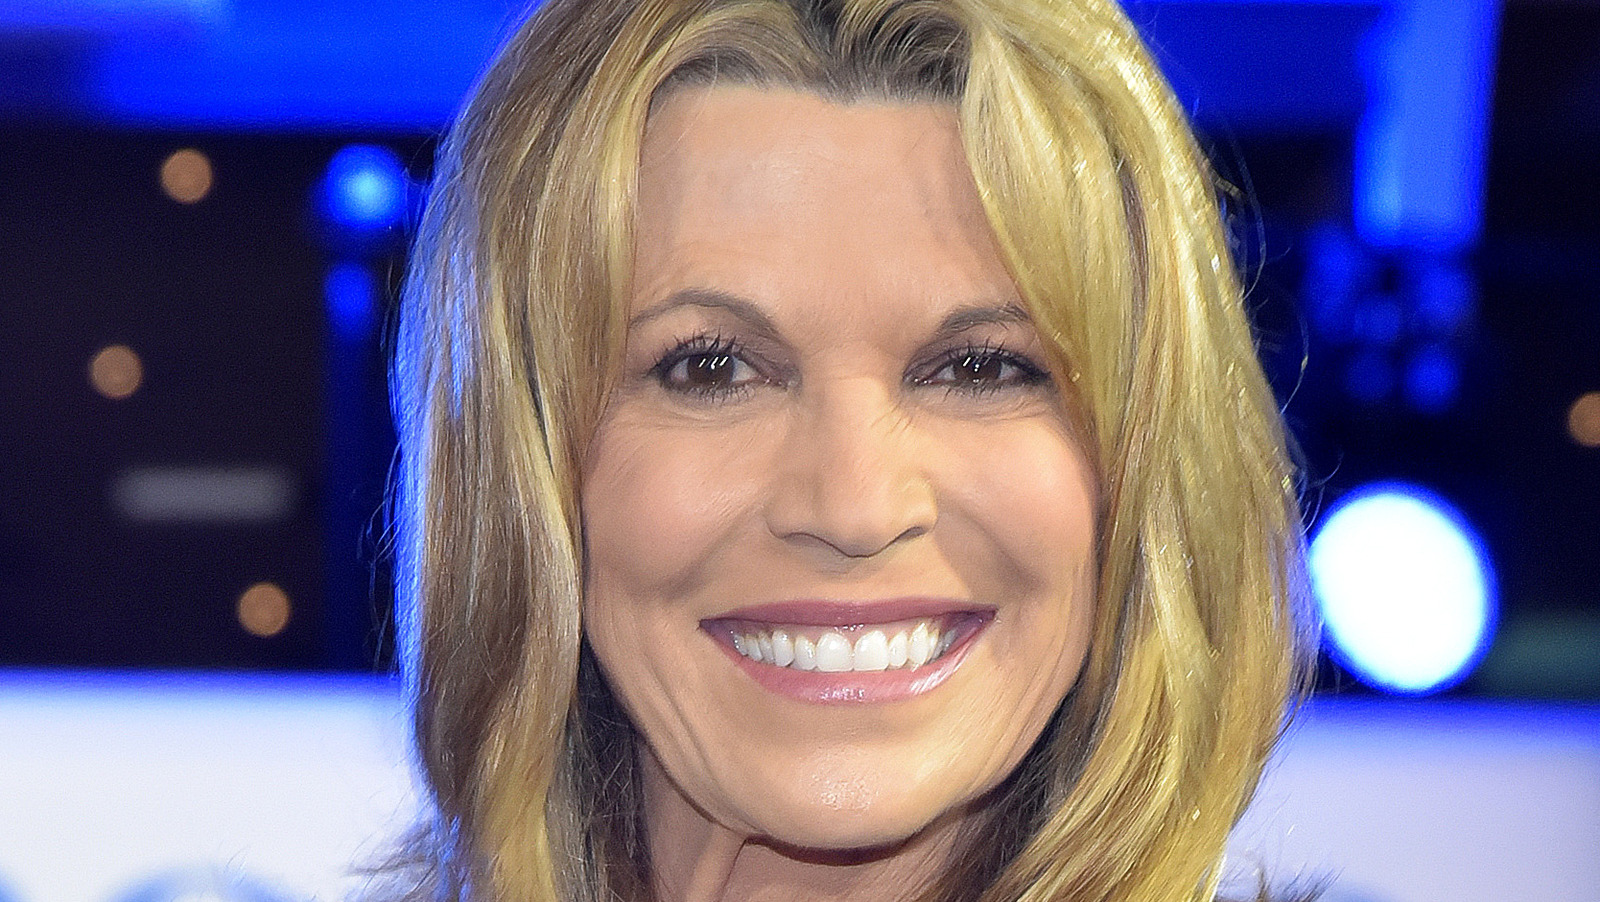 Vanna White's Net Worth The Wheel Of Fortune Host Makes More Than You